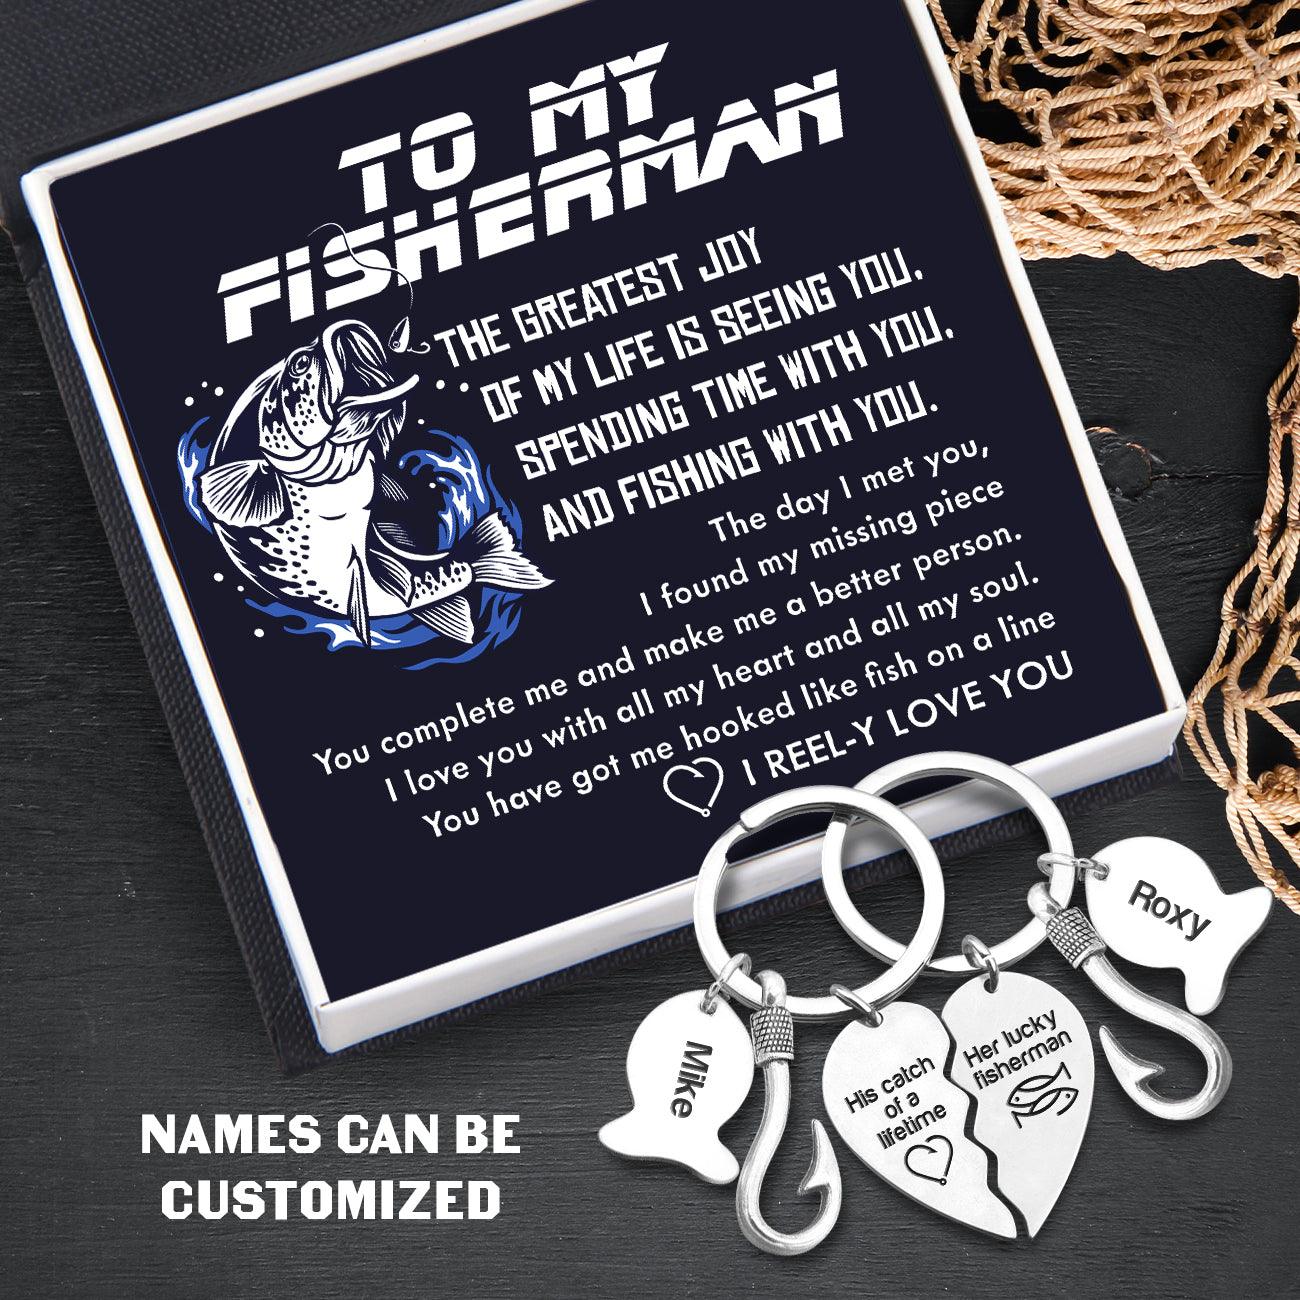 Personalized Fishing Heart Puzzle Keychains - Fishing - To My Man - I Reel-y Love You - Augkbn26006 - Gifts Holder